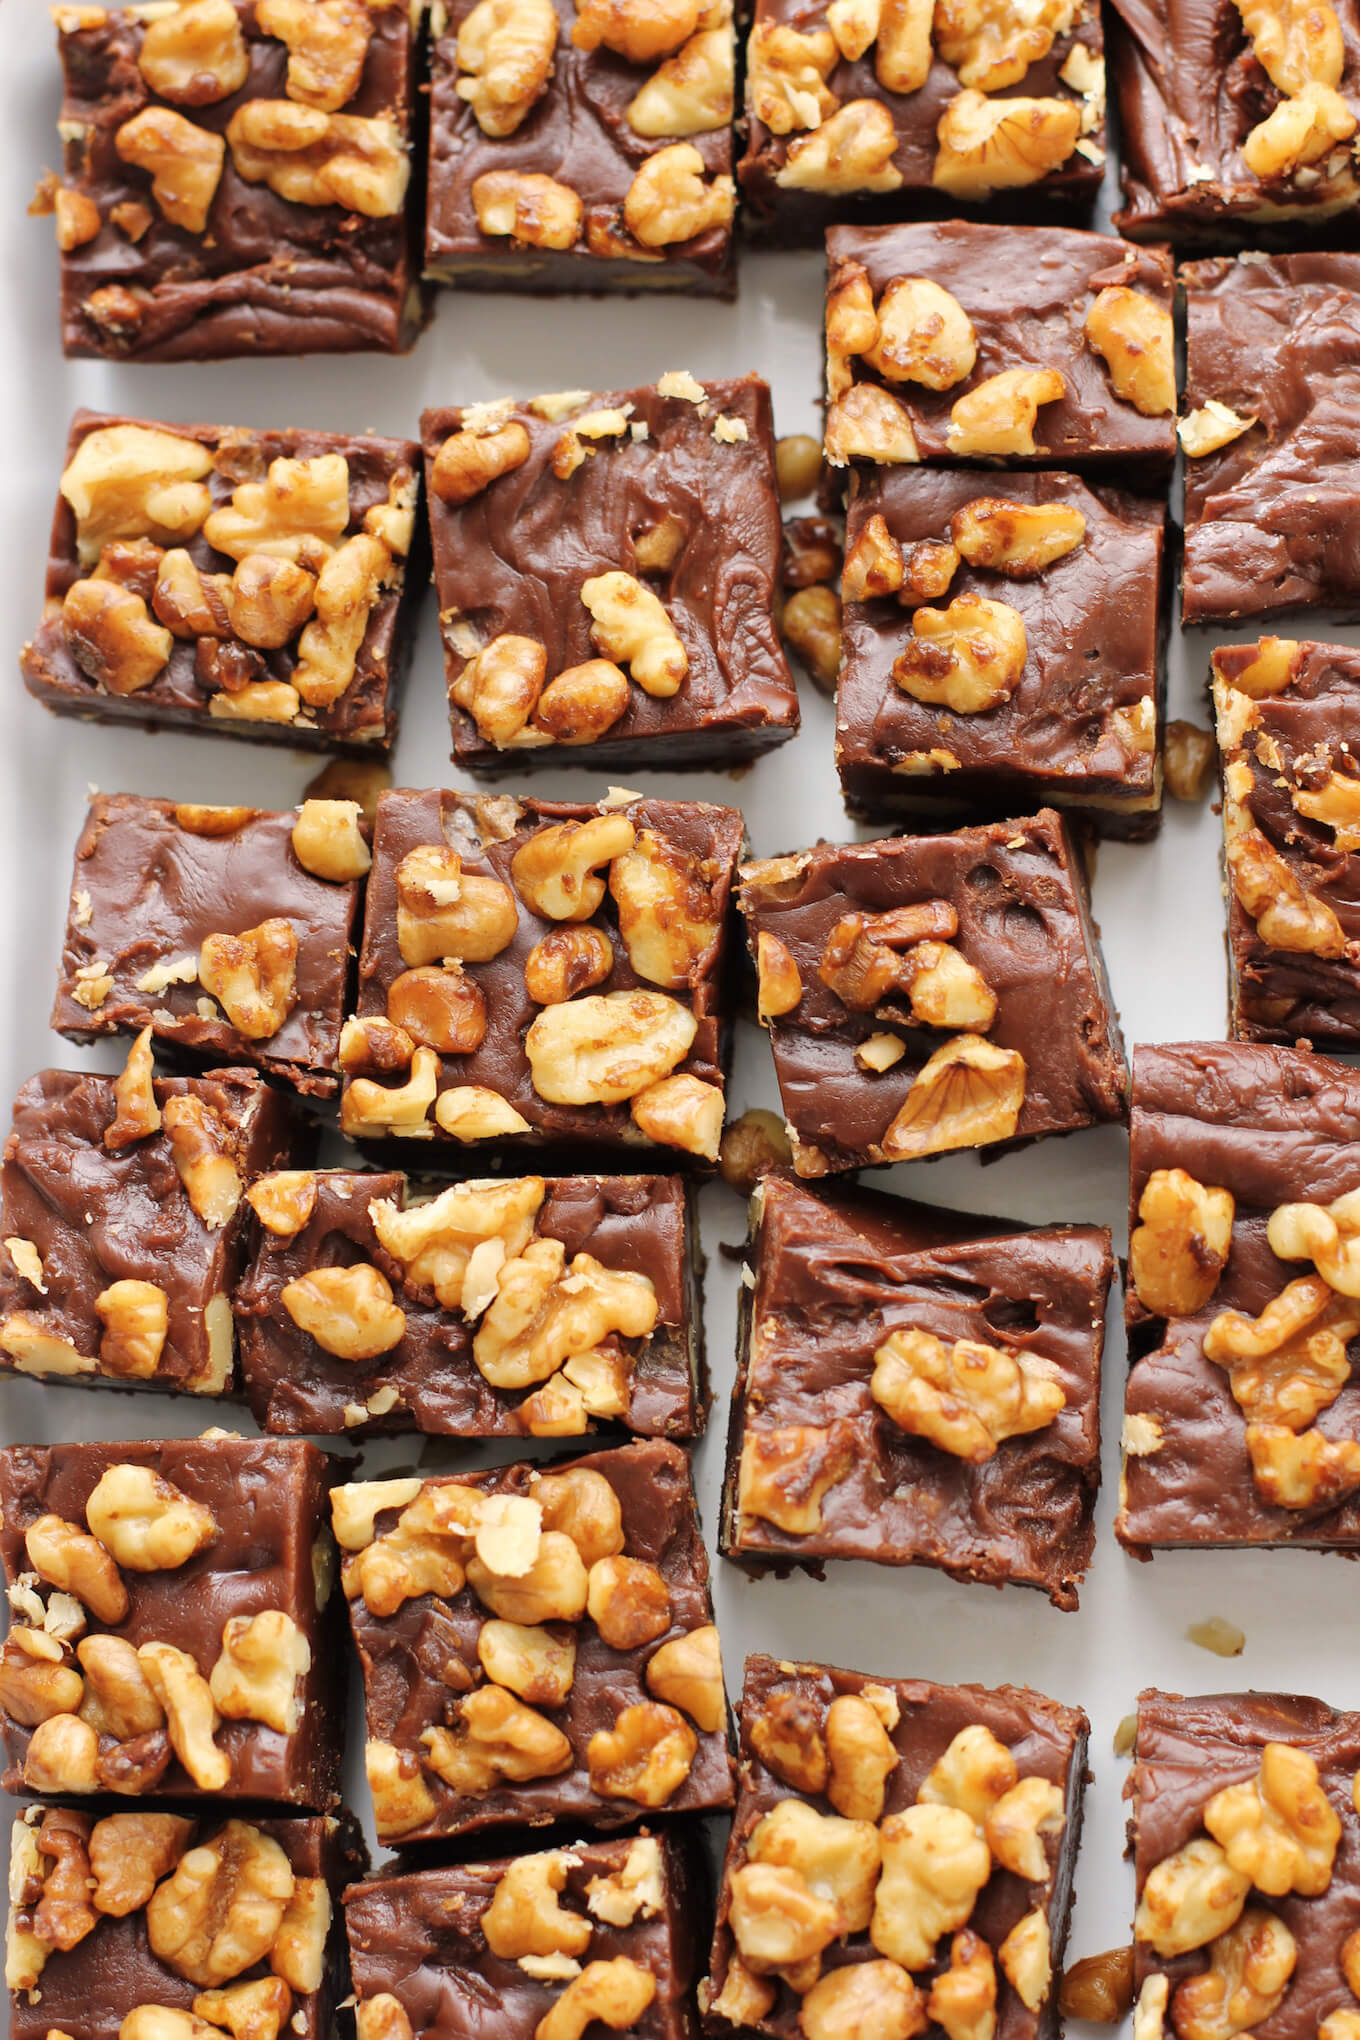 Chocolate Fudge with Candied Walnuts | Green Valley Kitchen